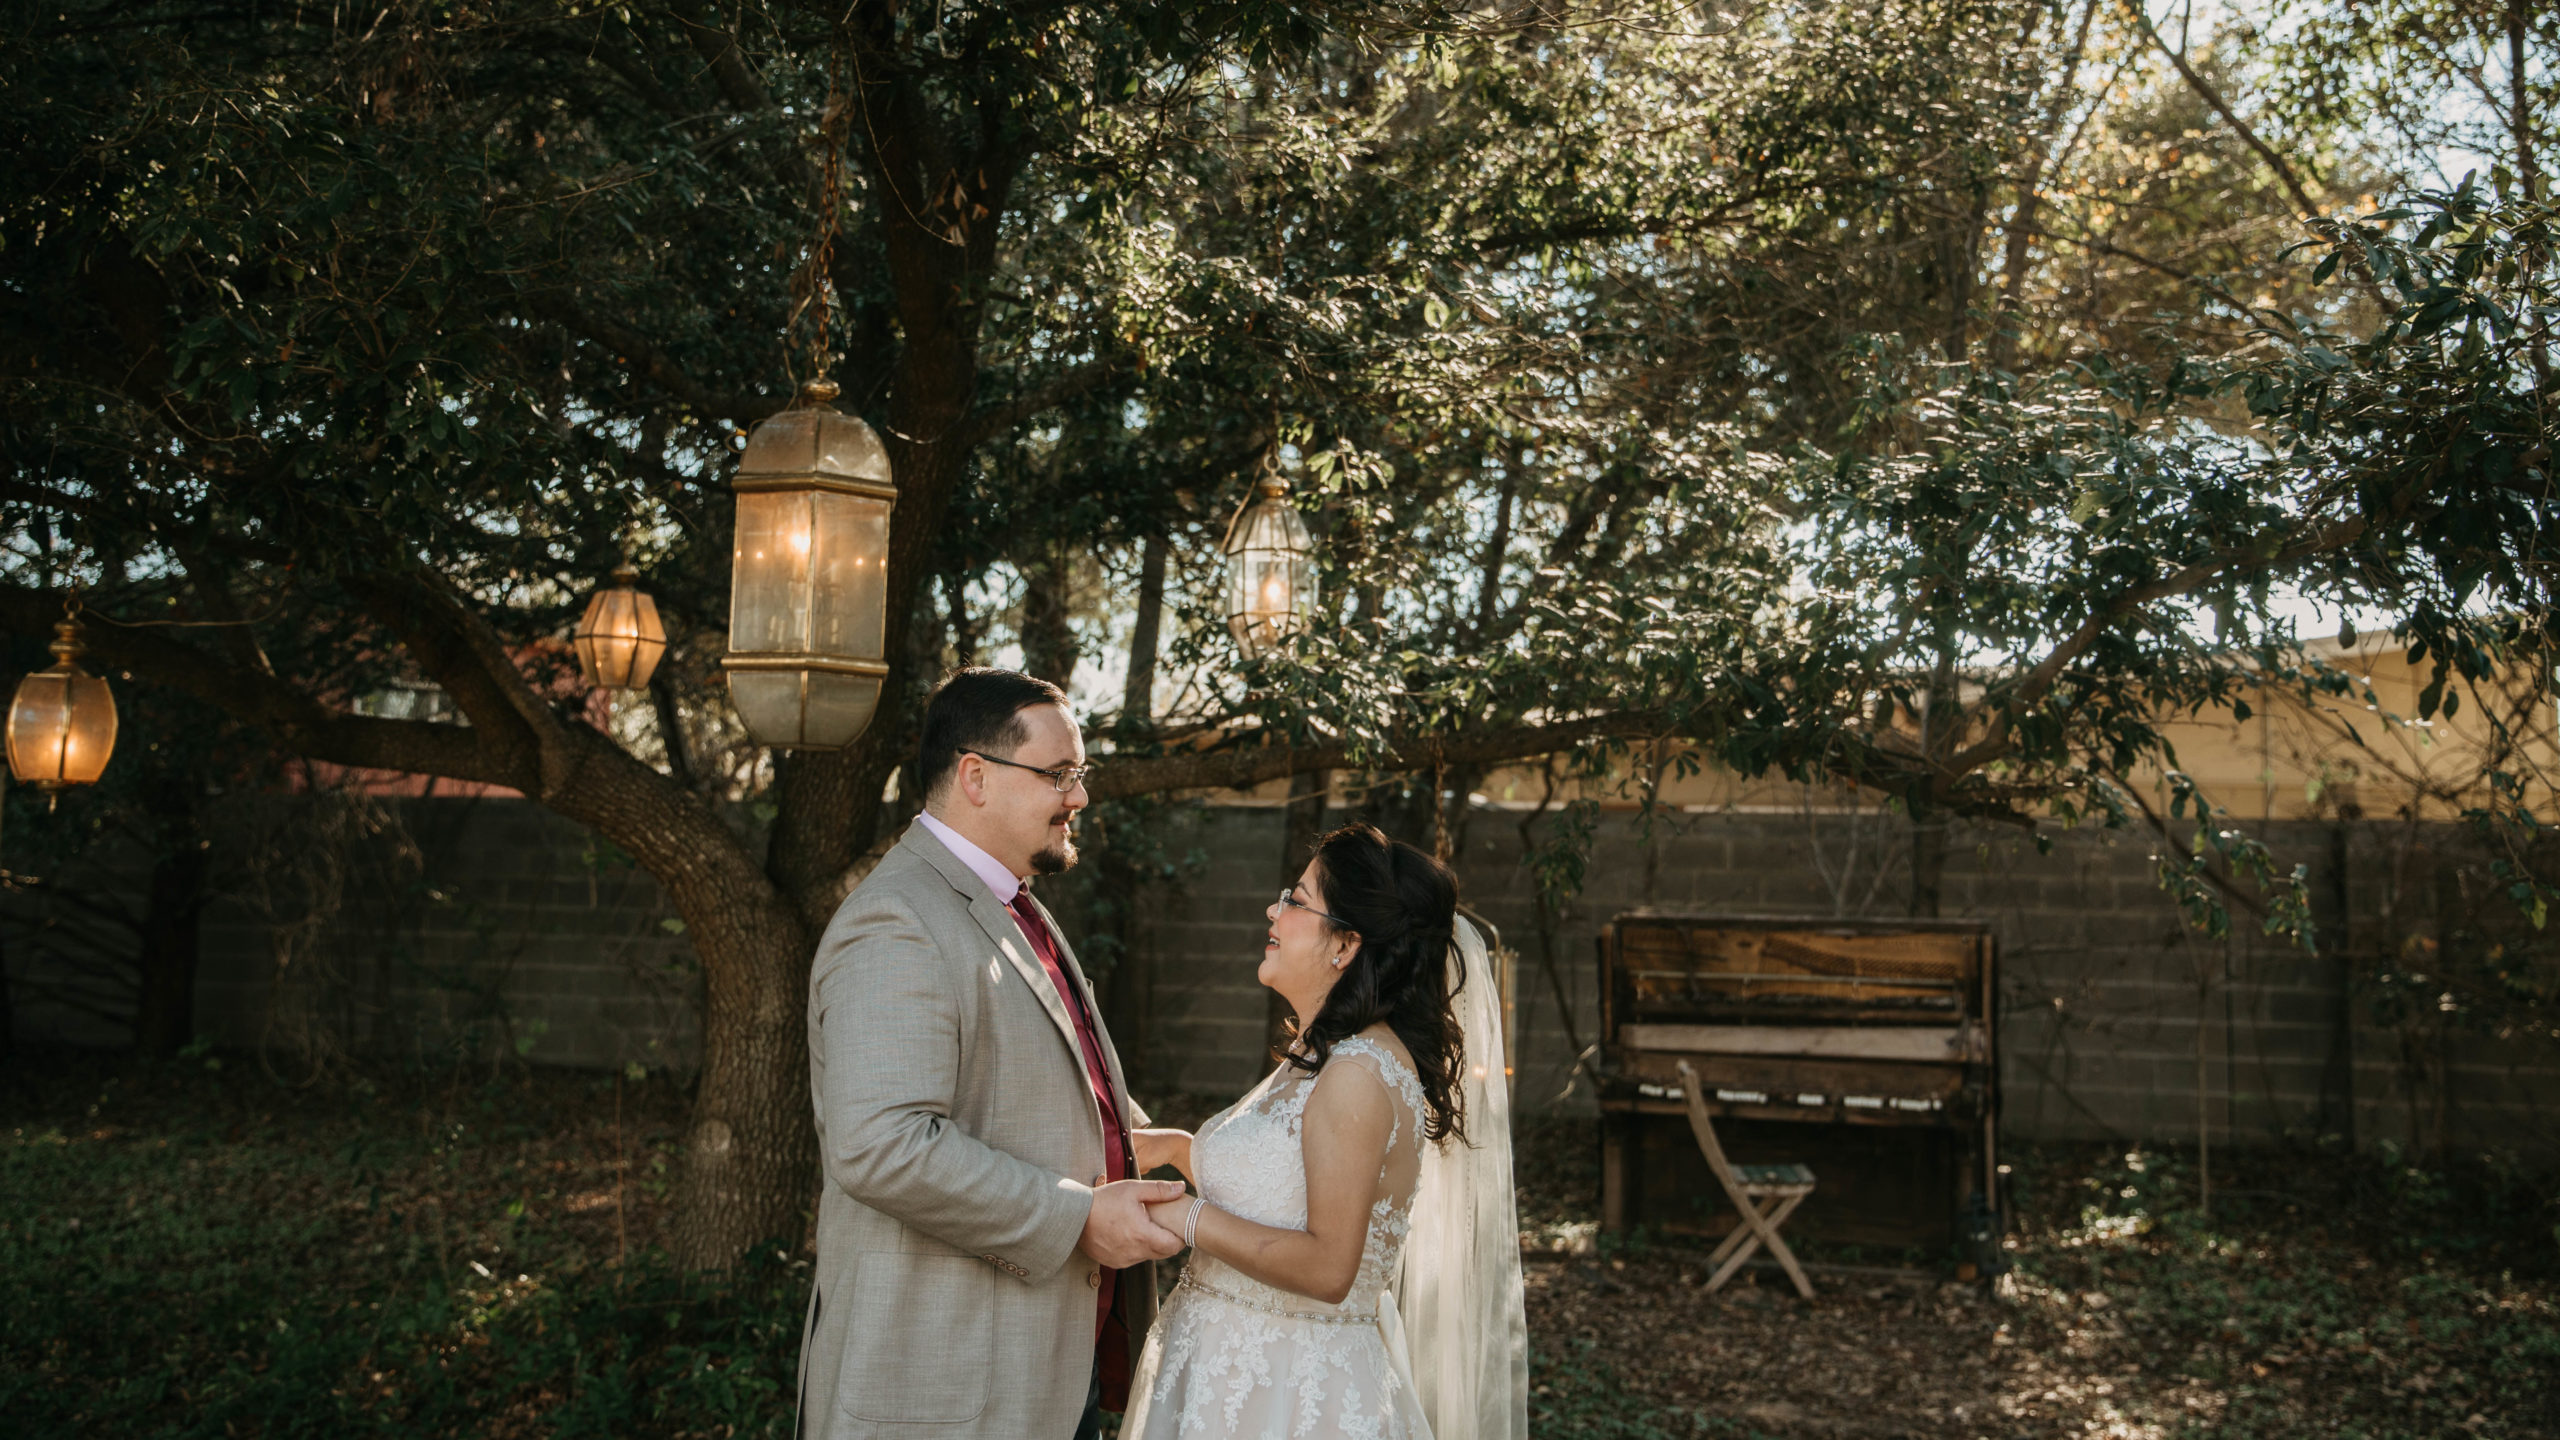 A photo of an eloping couples at the Sekrit Theater in Austin, Texas. The couple is standing under a chandelier tree during sunset.